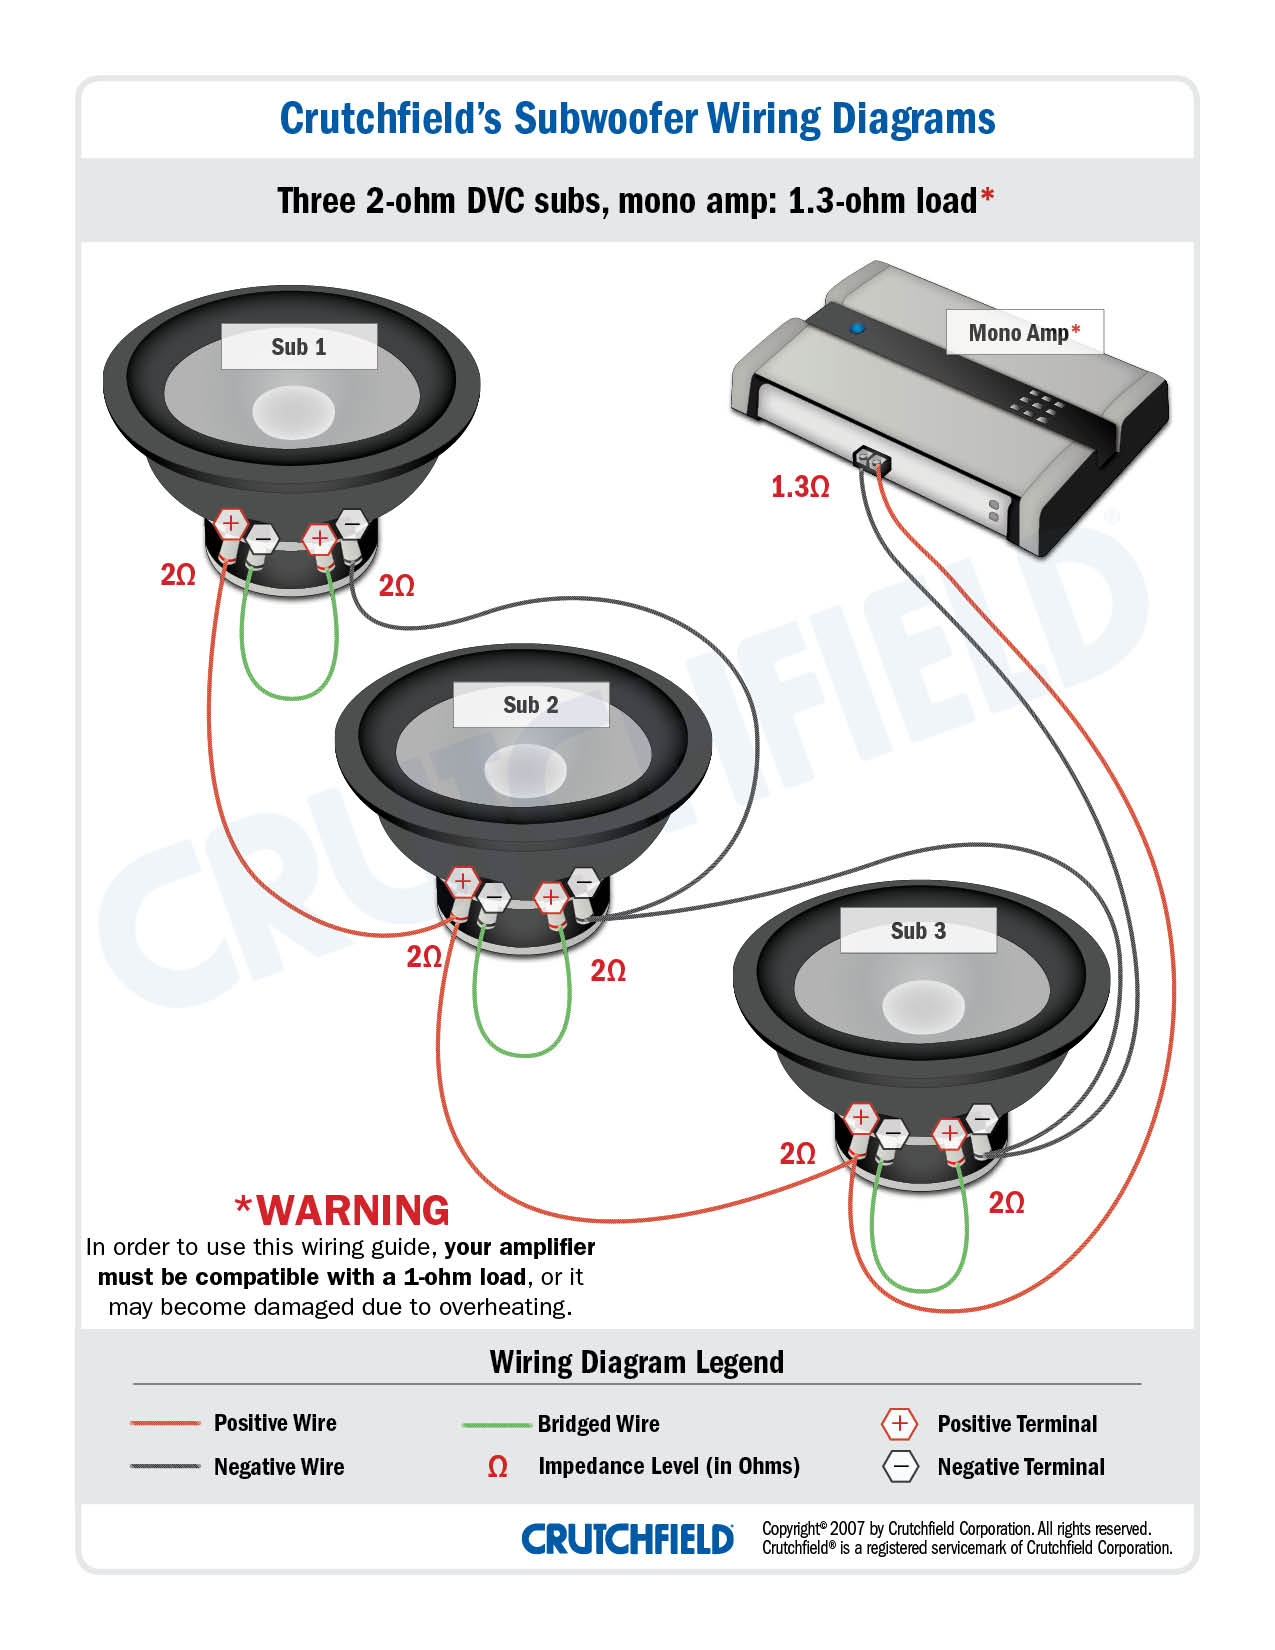 Subwoofer Wiring Diagrams — How To Wire Your Subs - Sub Wiring Diagram